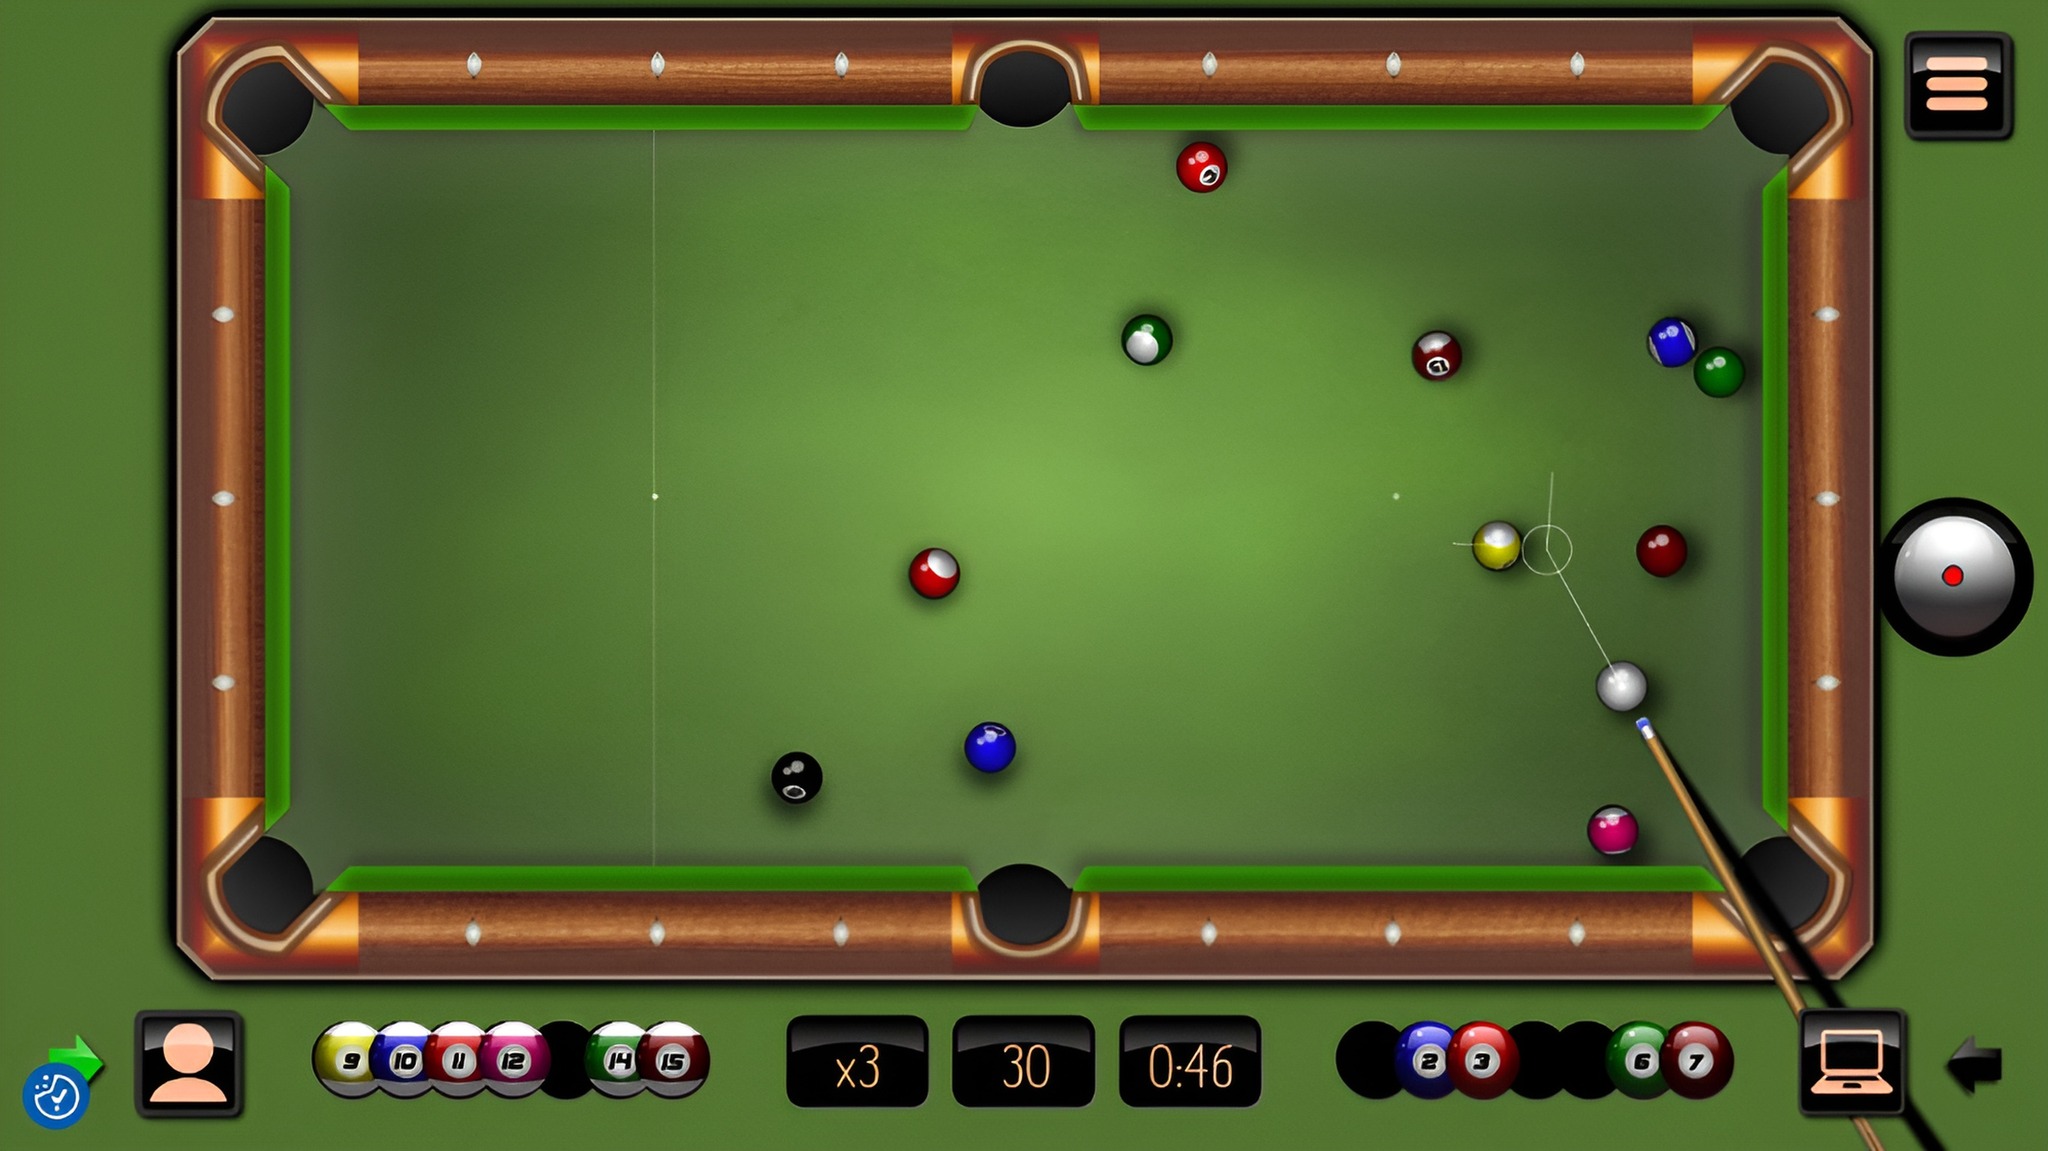 Image 8 Ball Billiards Classic - Play Free Online Sports Game